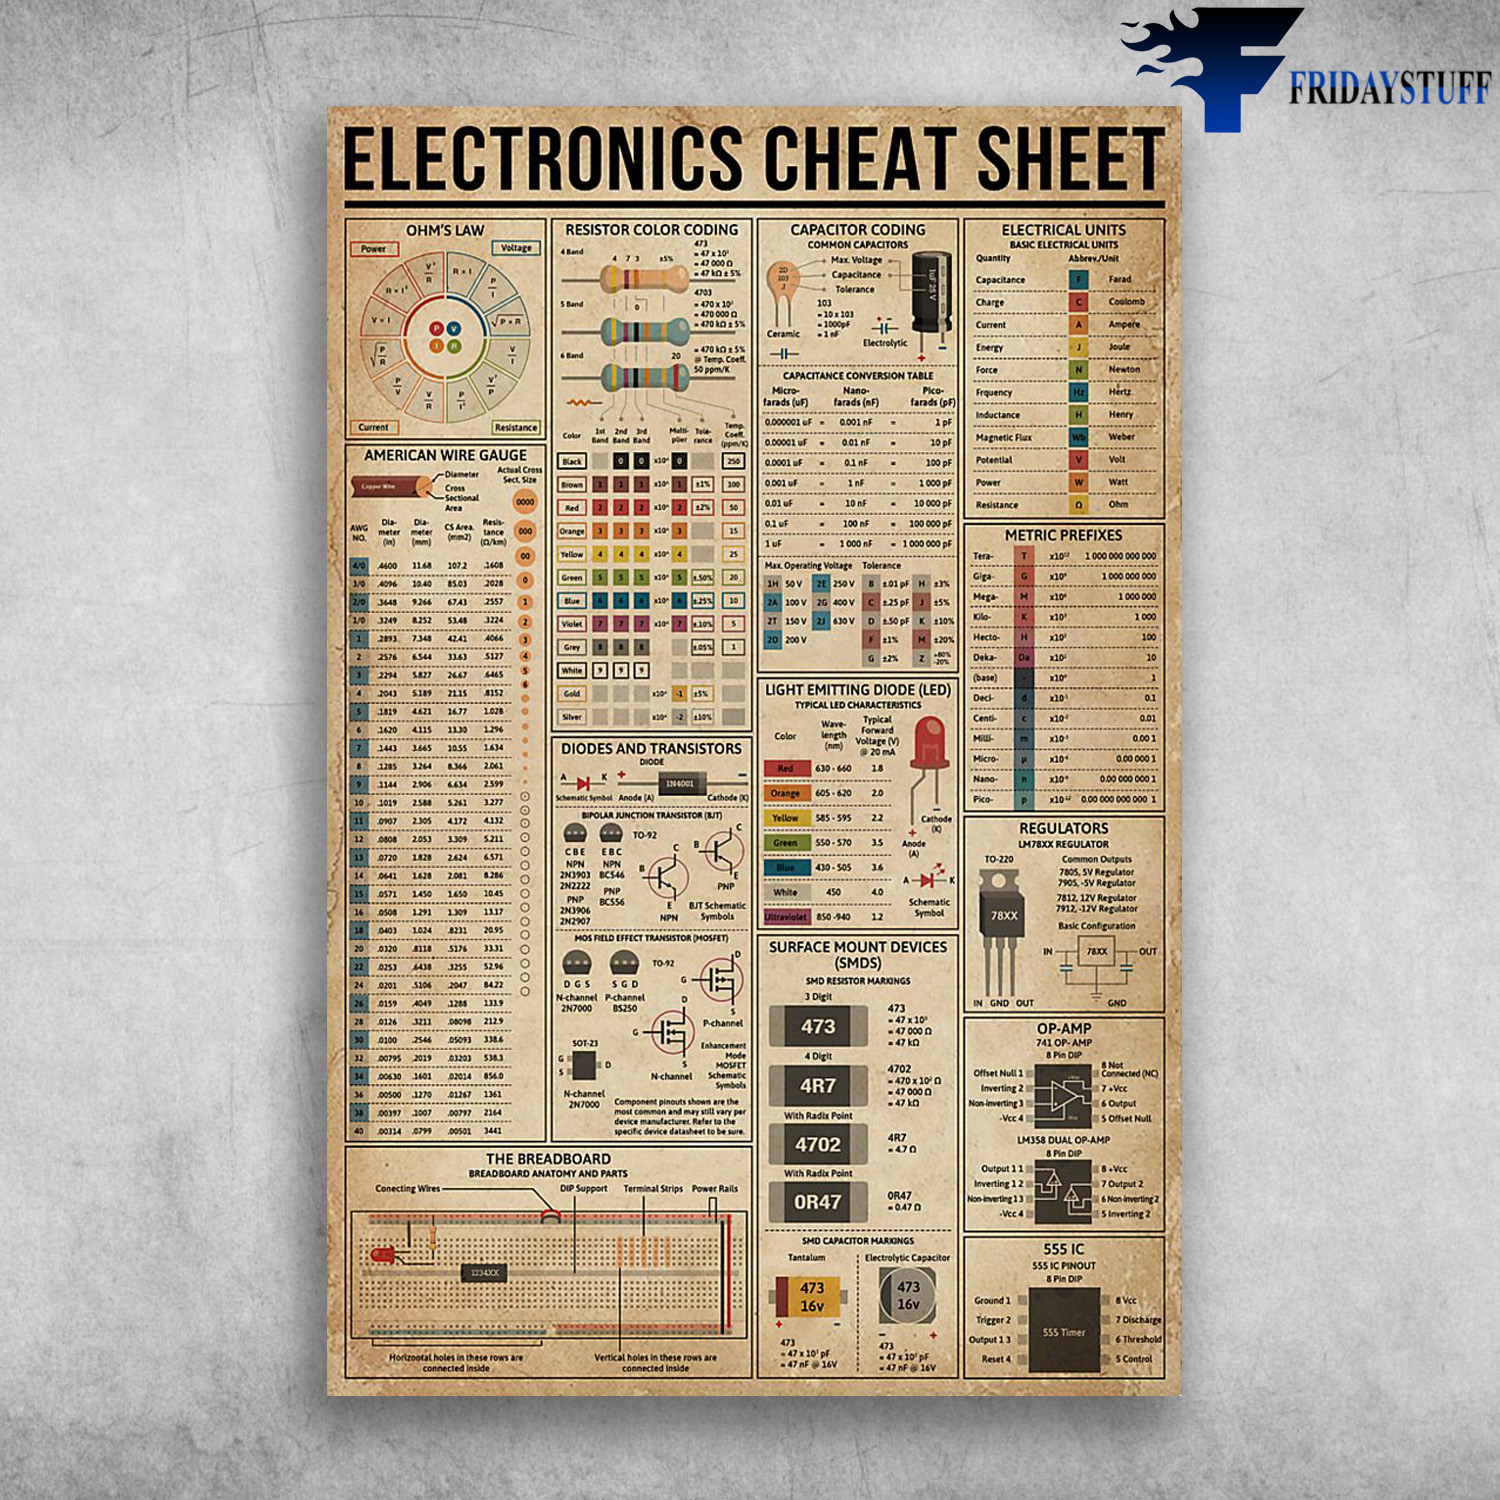 The Knowledge About Electronics Cheat Sheet